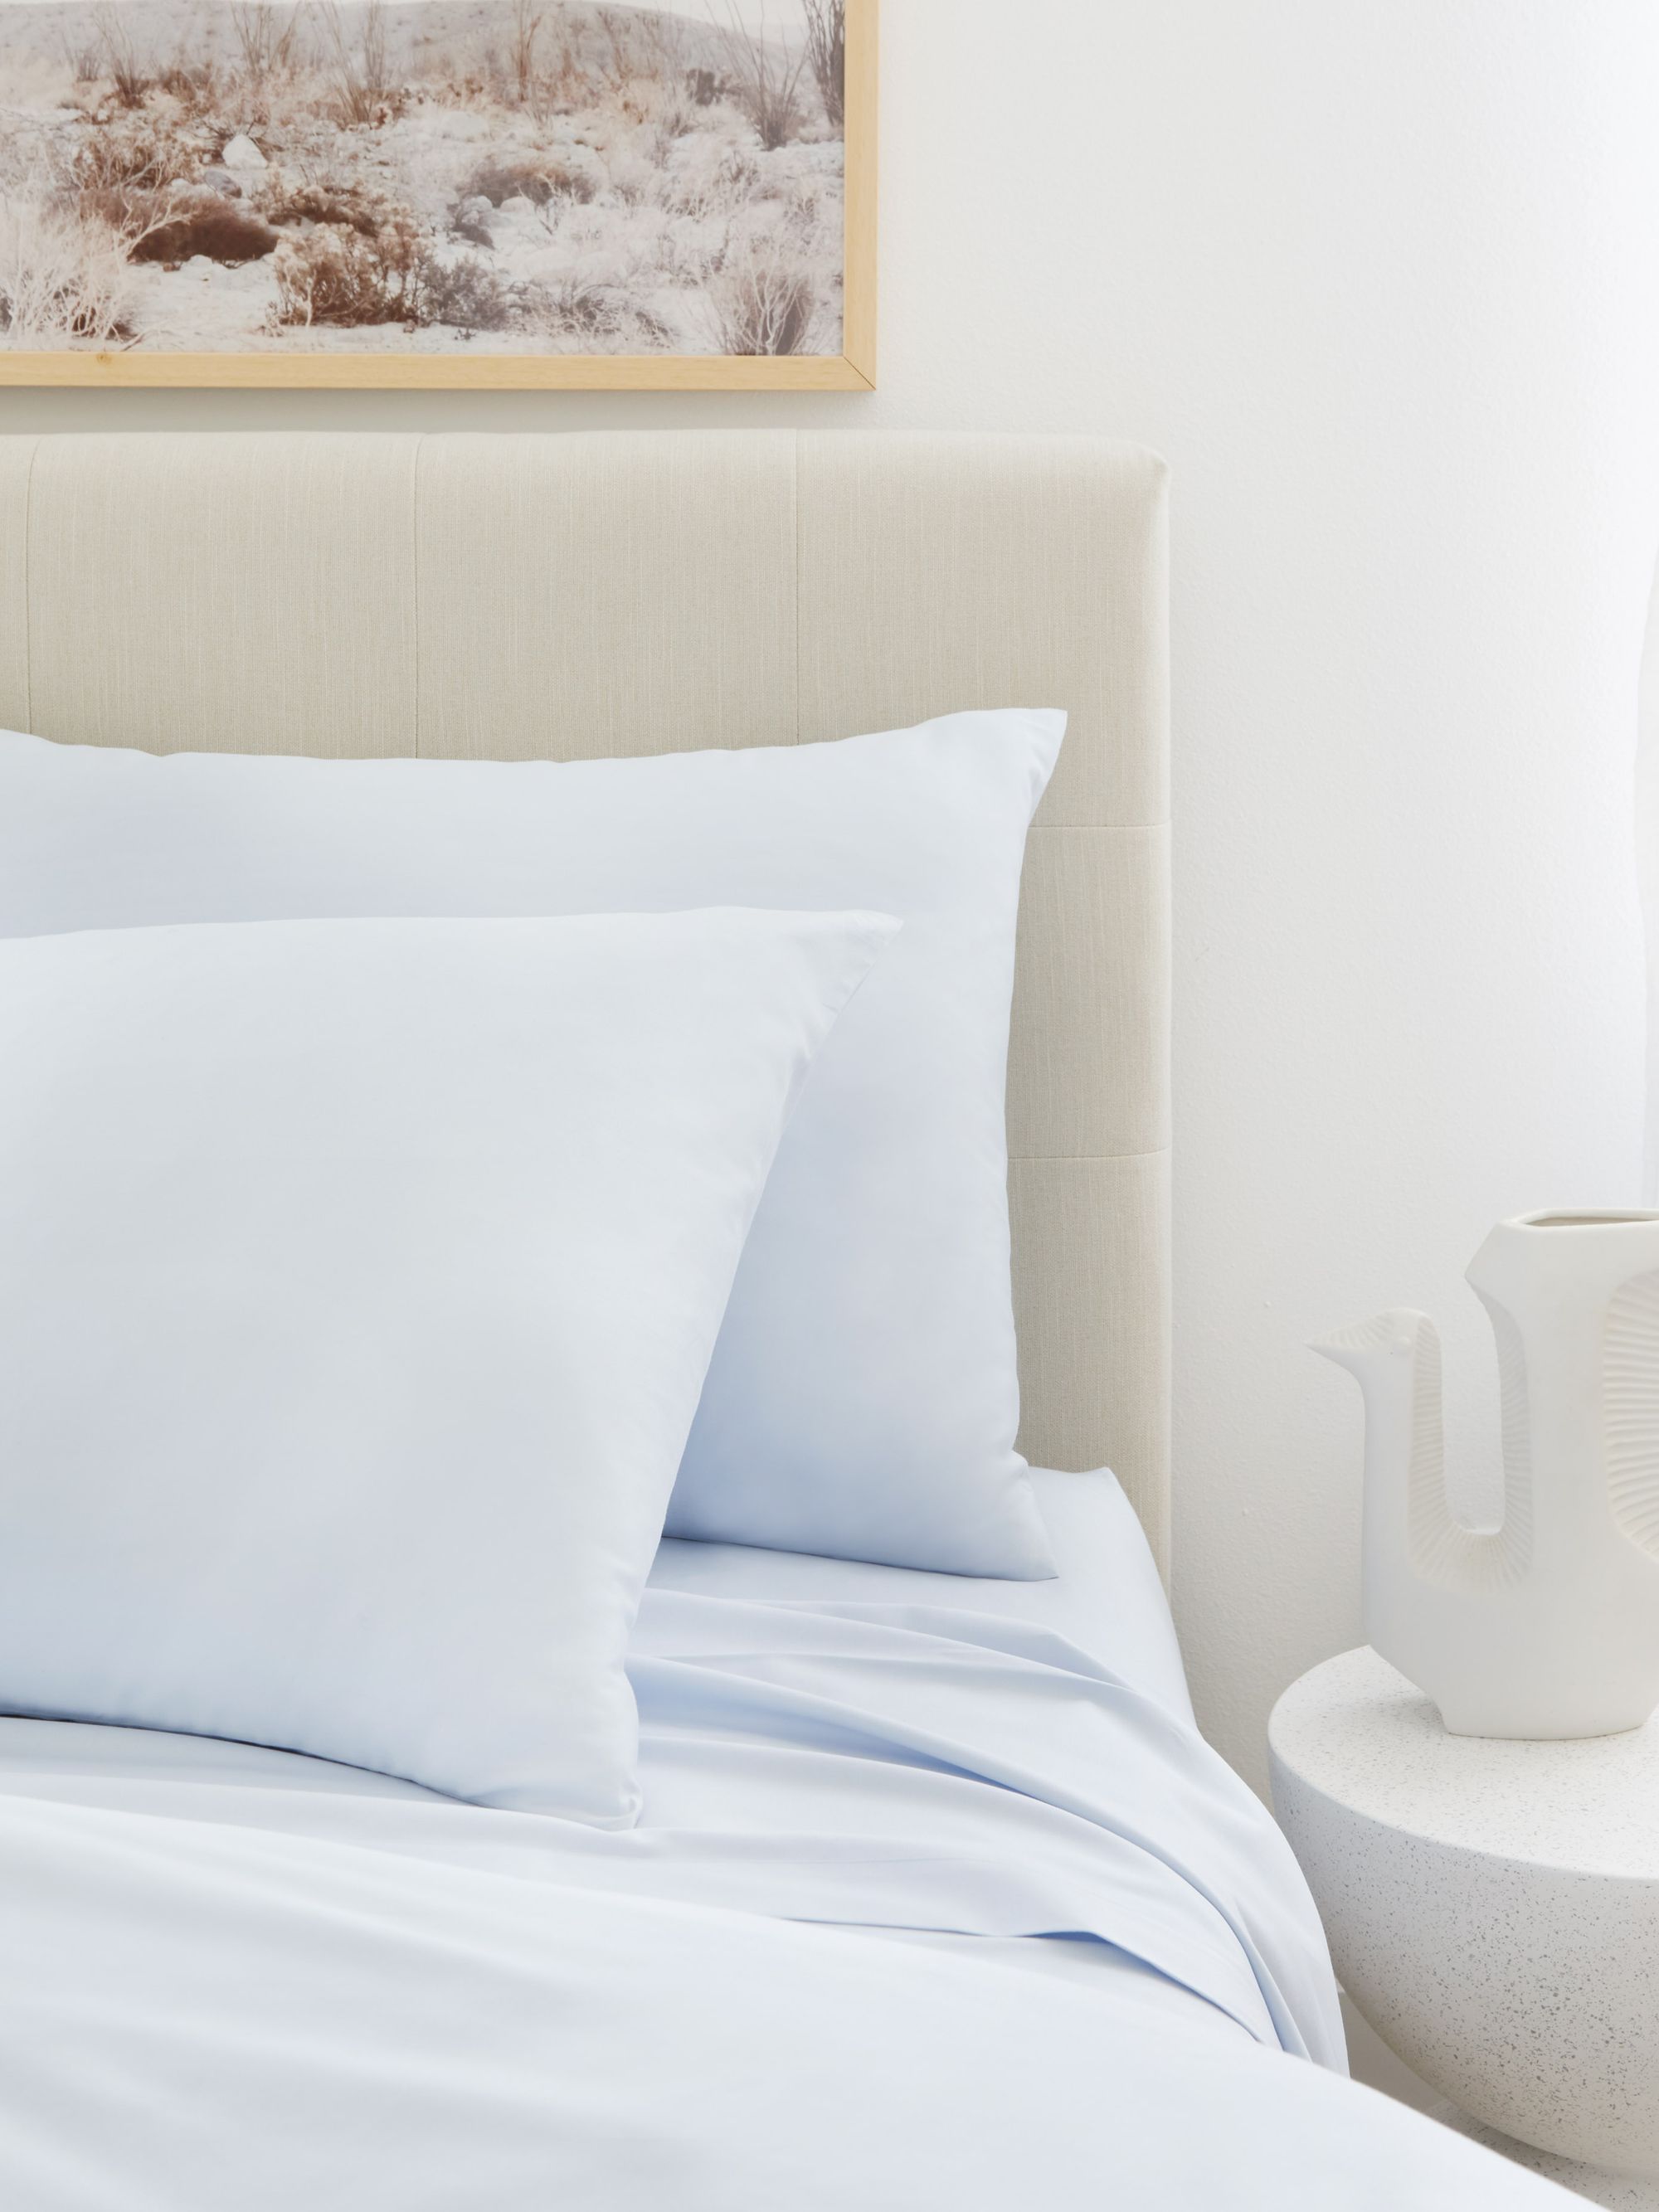 A Comprehensive Comparison: Tencel vs Percale vs Sateen - Which Fabric Is the Best for Your Sheets?